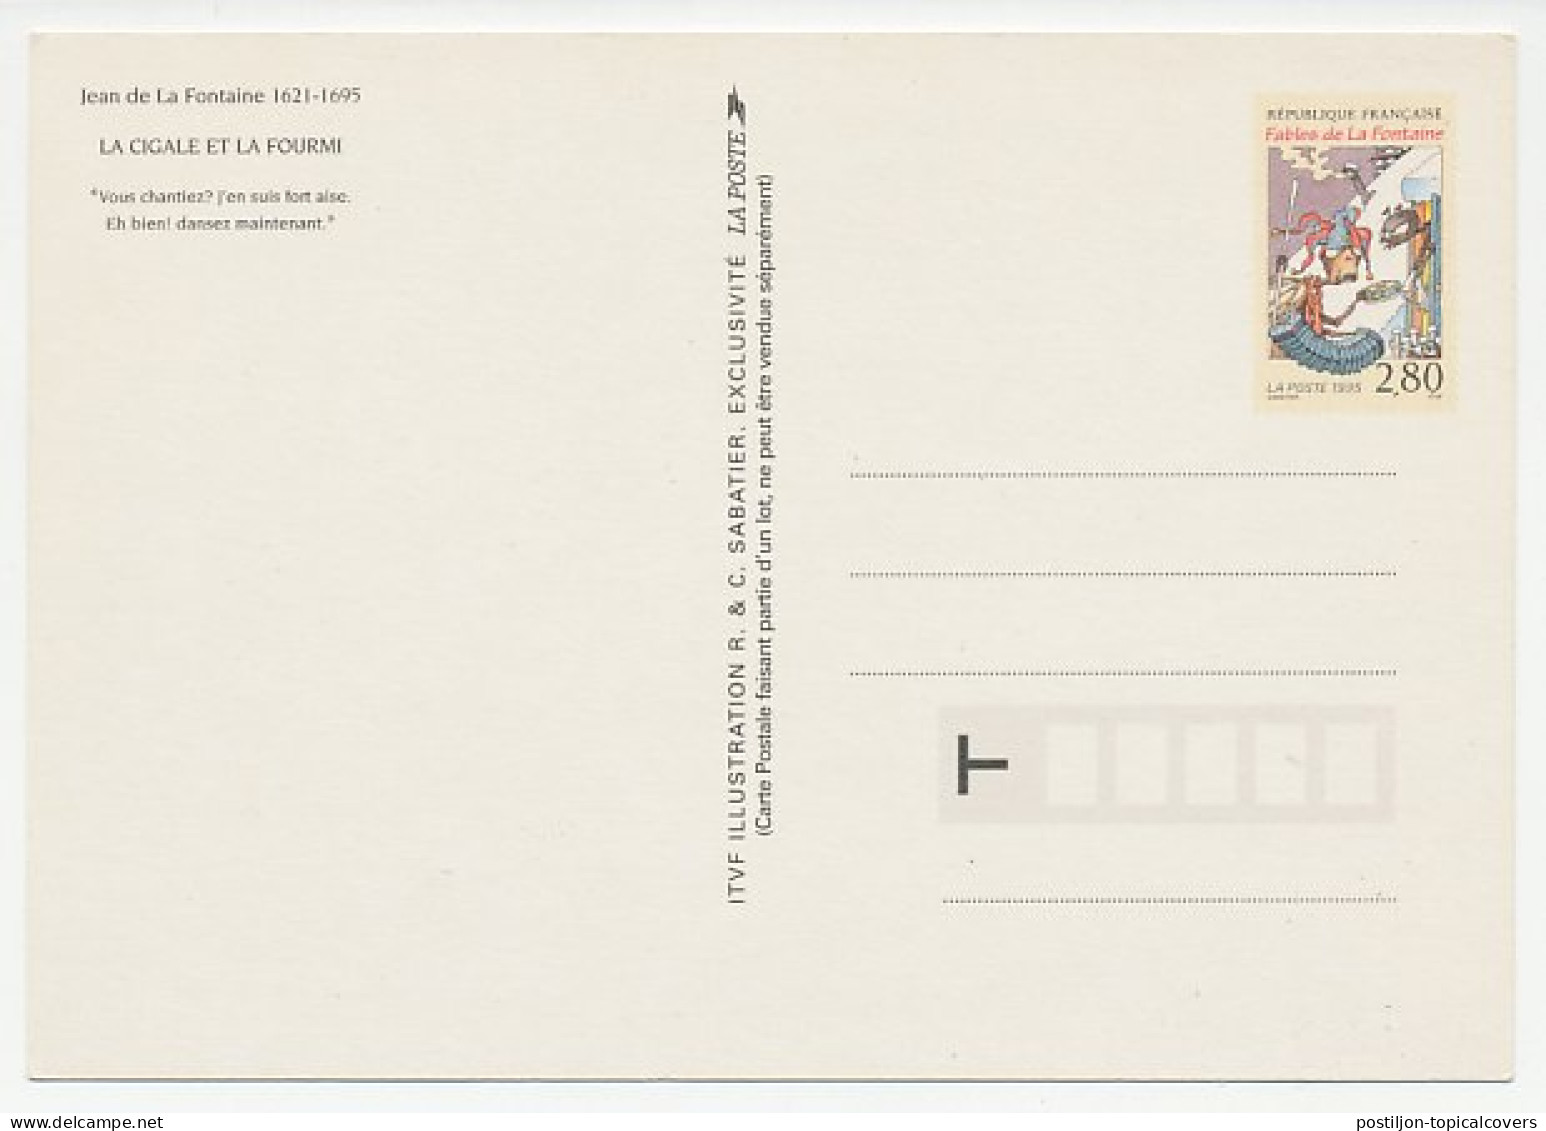 Postal Stationery France 1995 Jean De La Fontaine - The Ant And The Grasshopper - Contes, Fables & Légendes